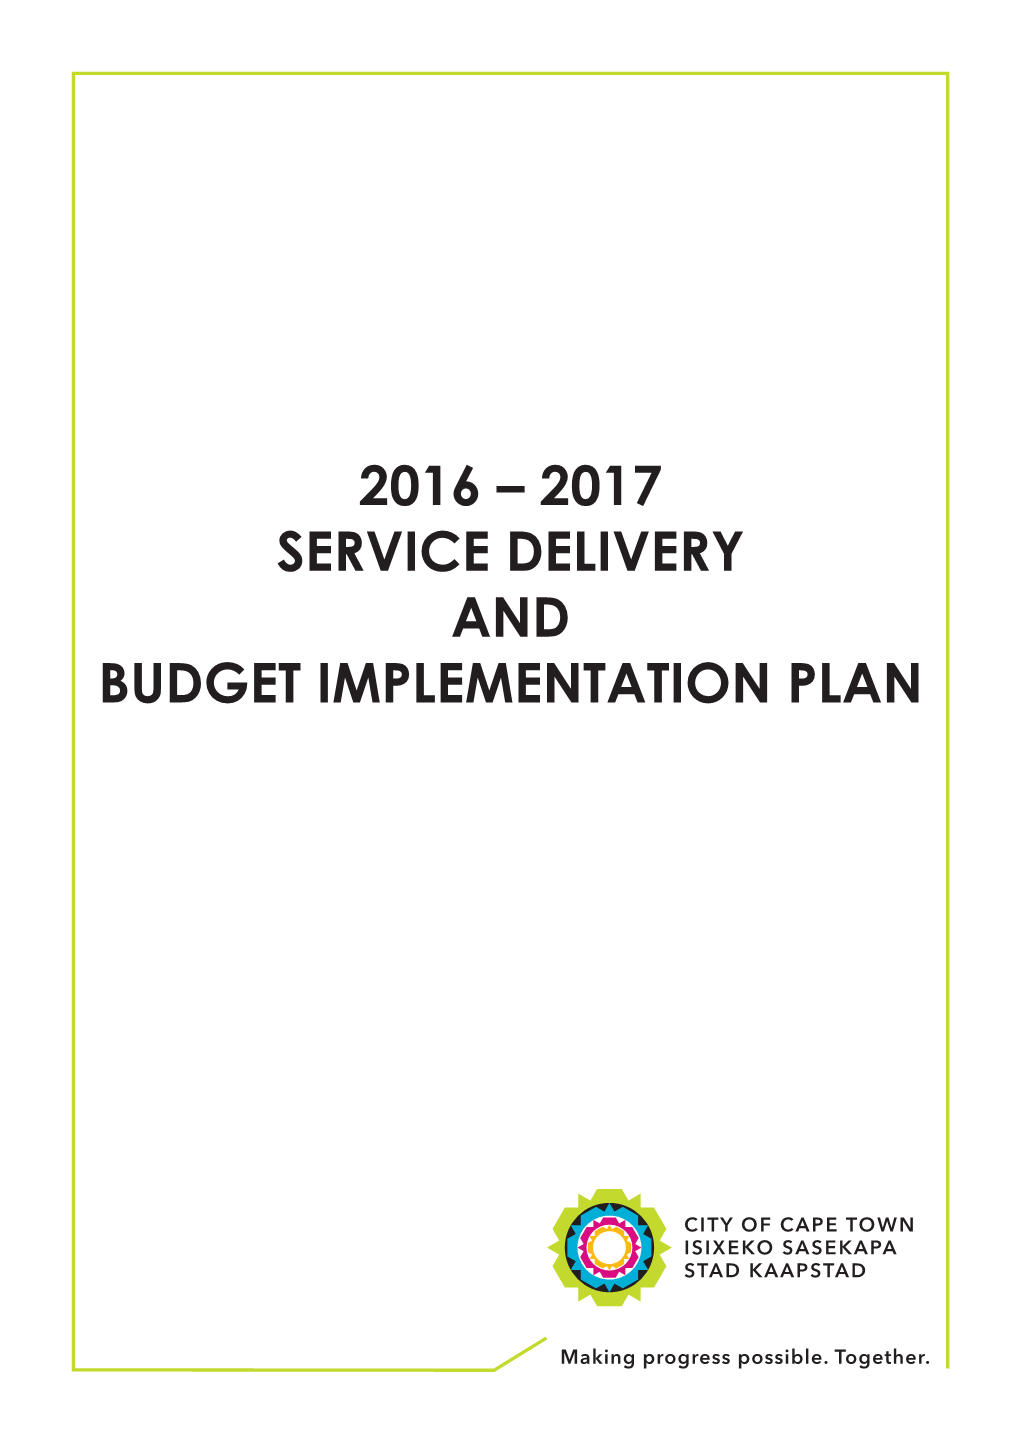 2016 – 2017 Service Delivery and Budget Implementation Plan